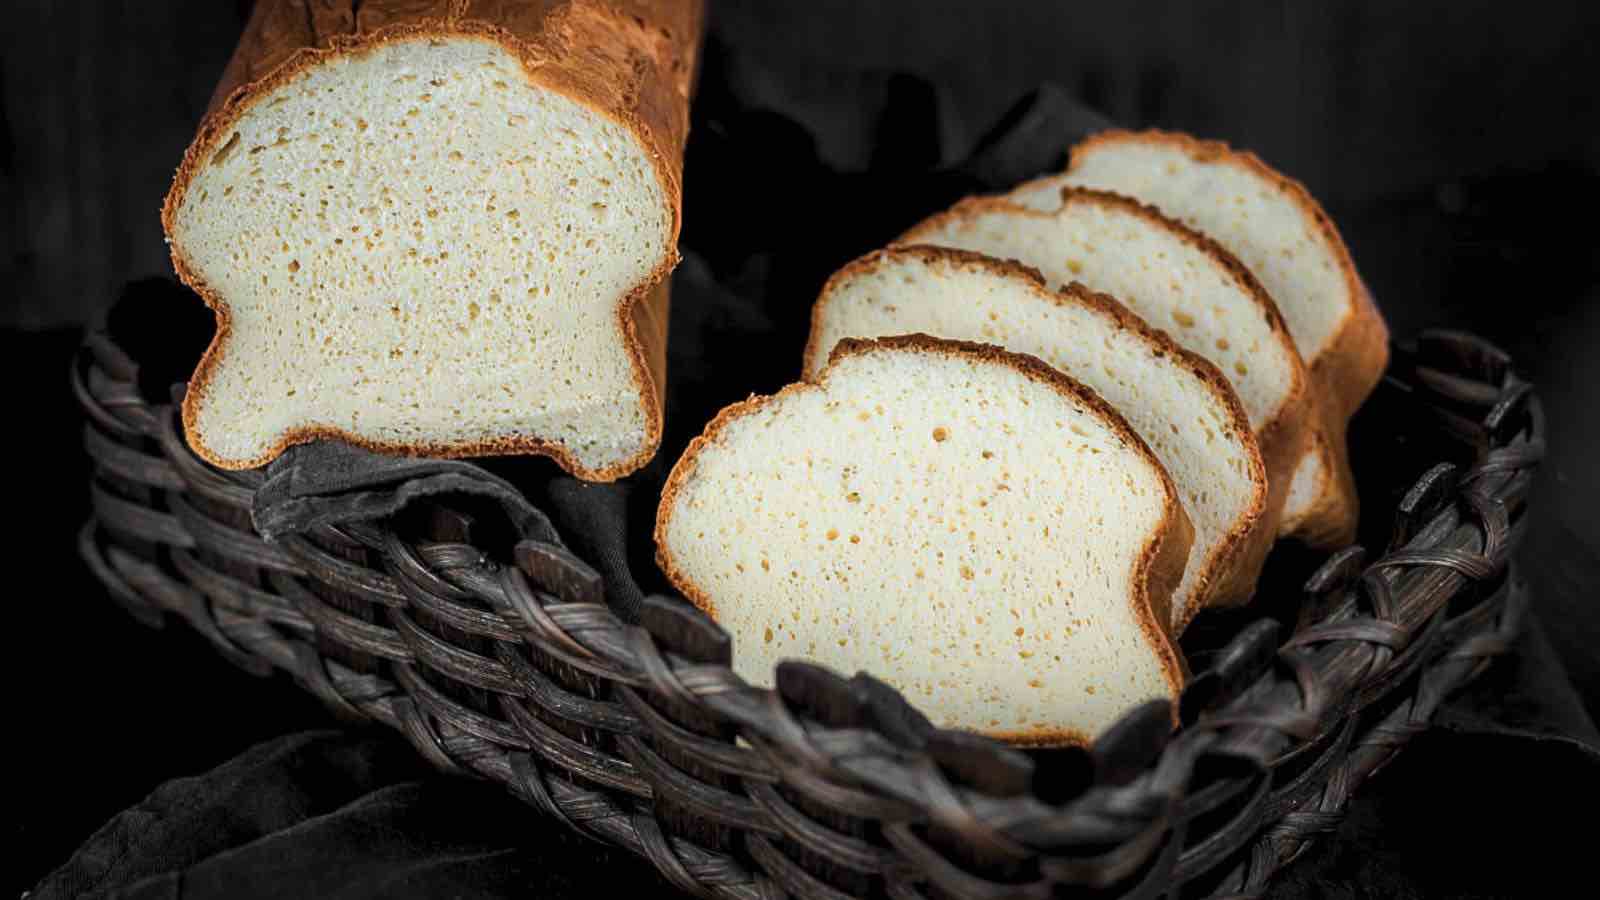 Two slices of bread in a basket on a black background.